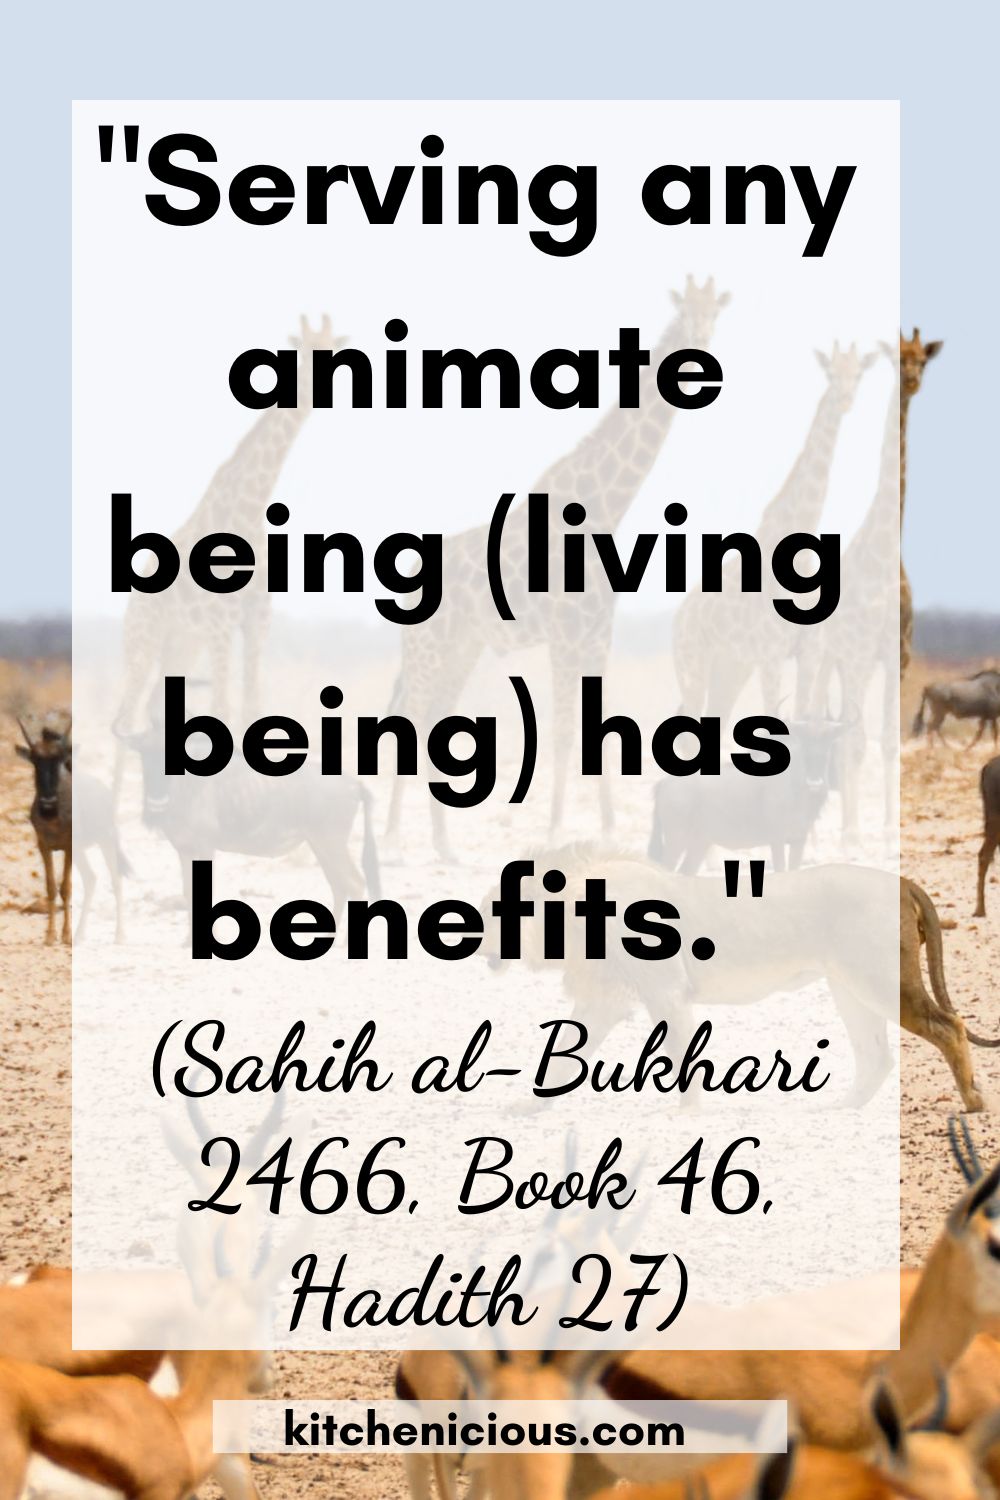 21 Quran Verses And Authentic Hadith About Kindness To Animals |  Kitchenicious